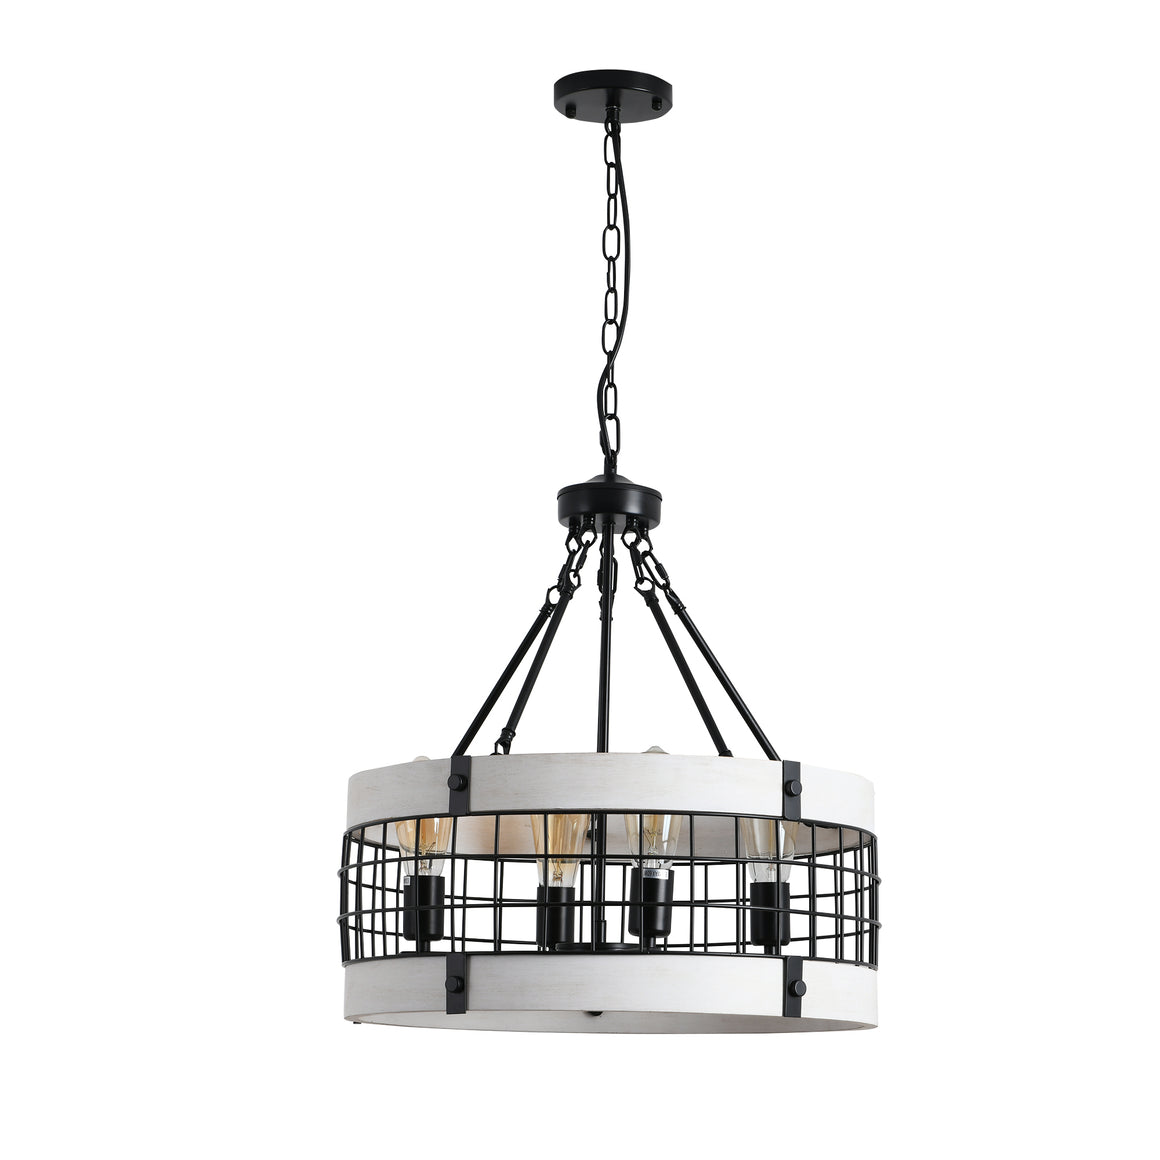 River Quinn 4 Light Industrial Circular Pendant in Iron and Wood